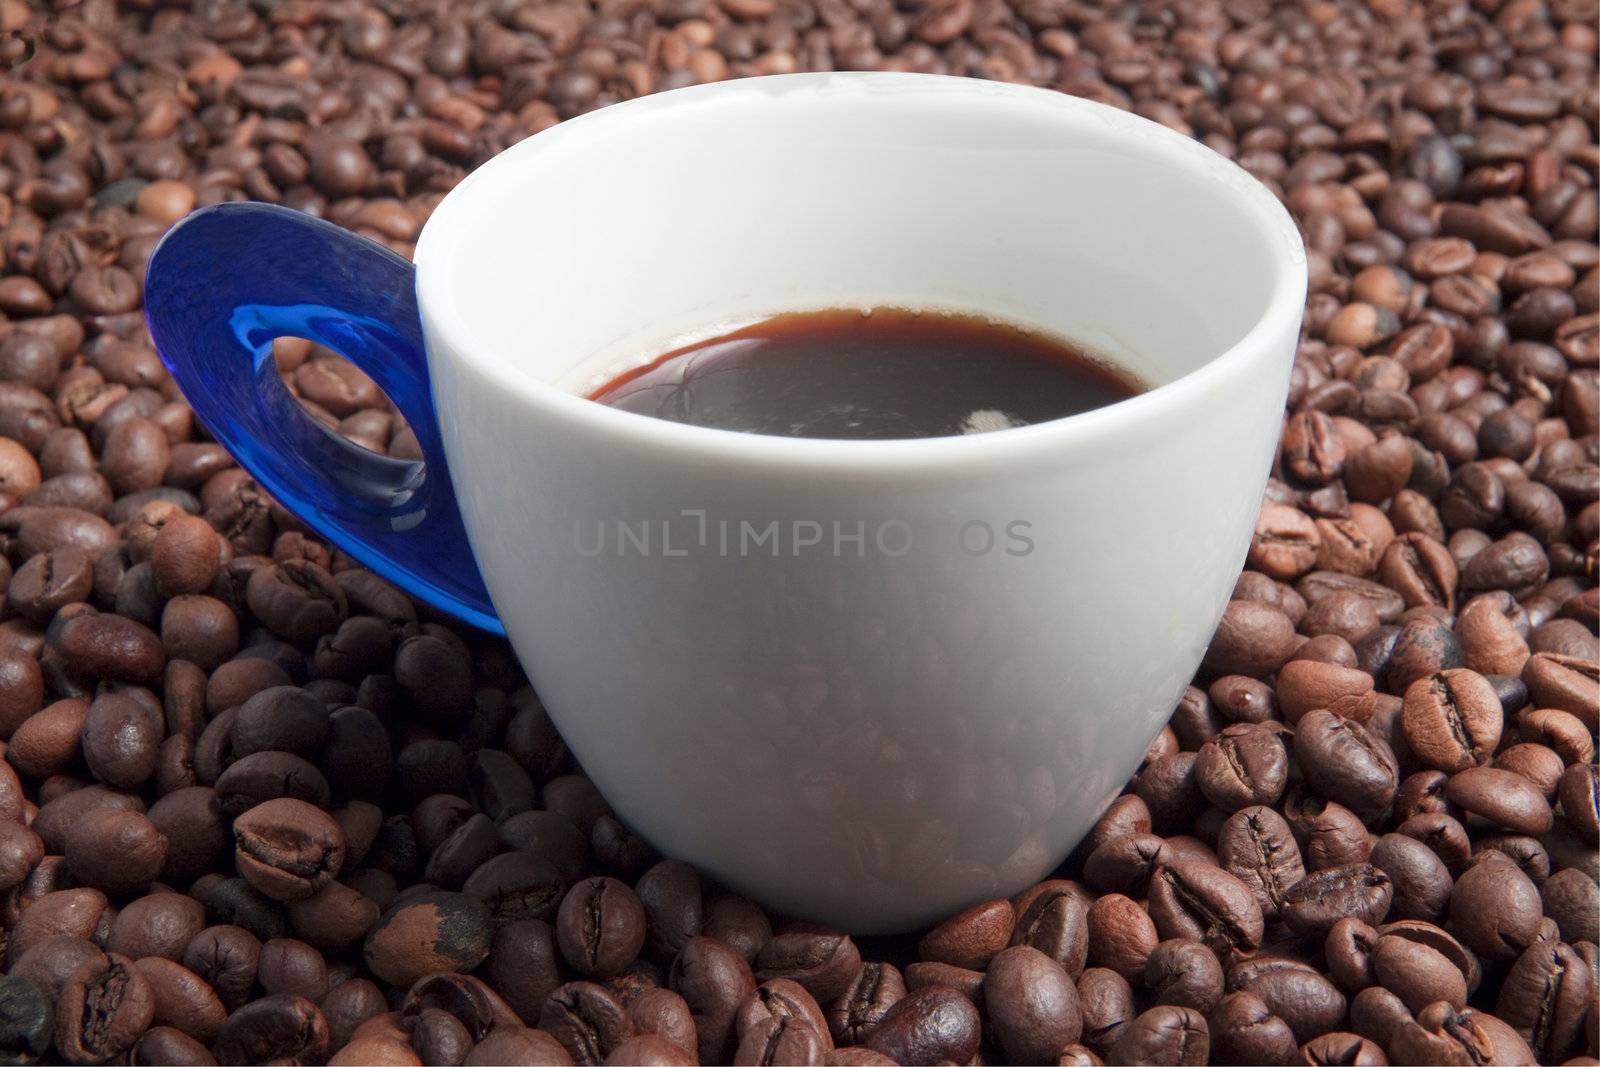 White and blue cup of coffee surrounded by coffee beans